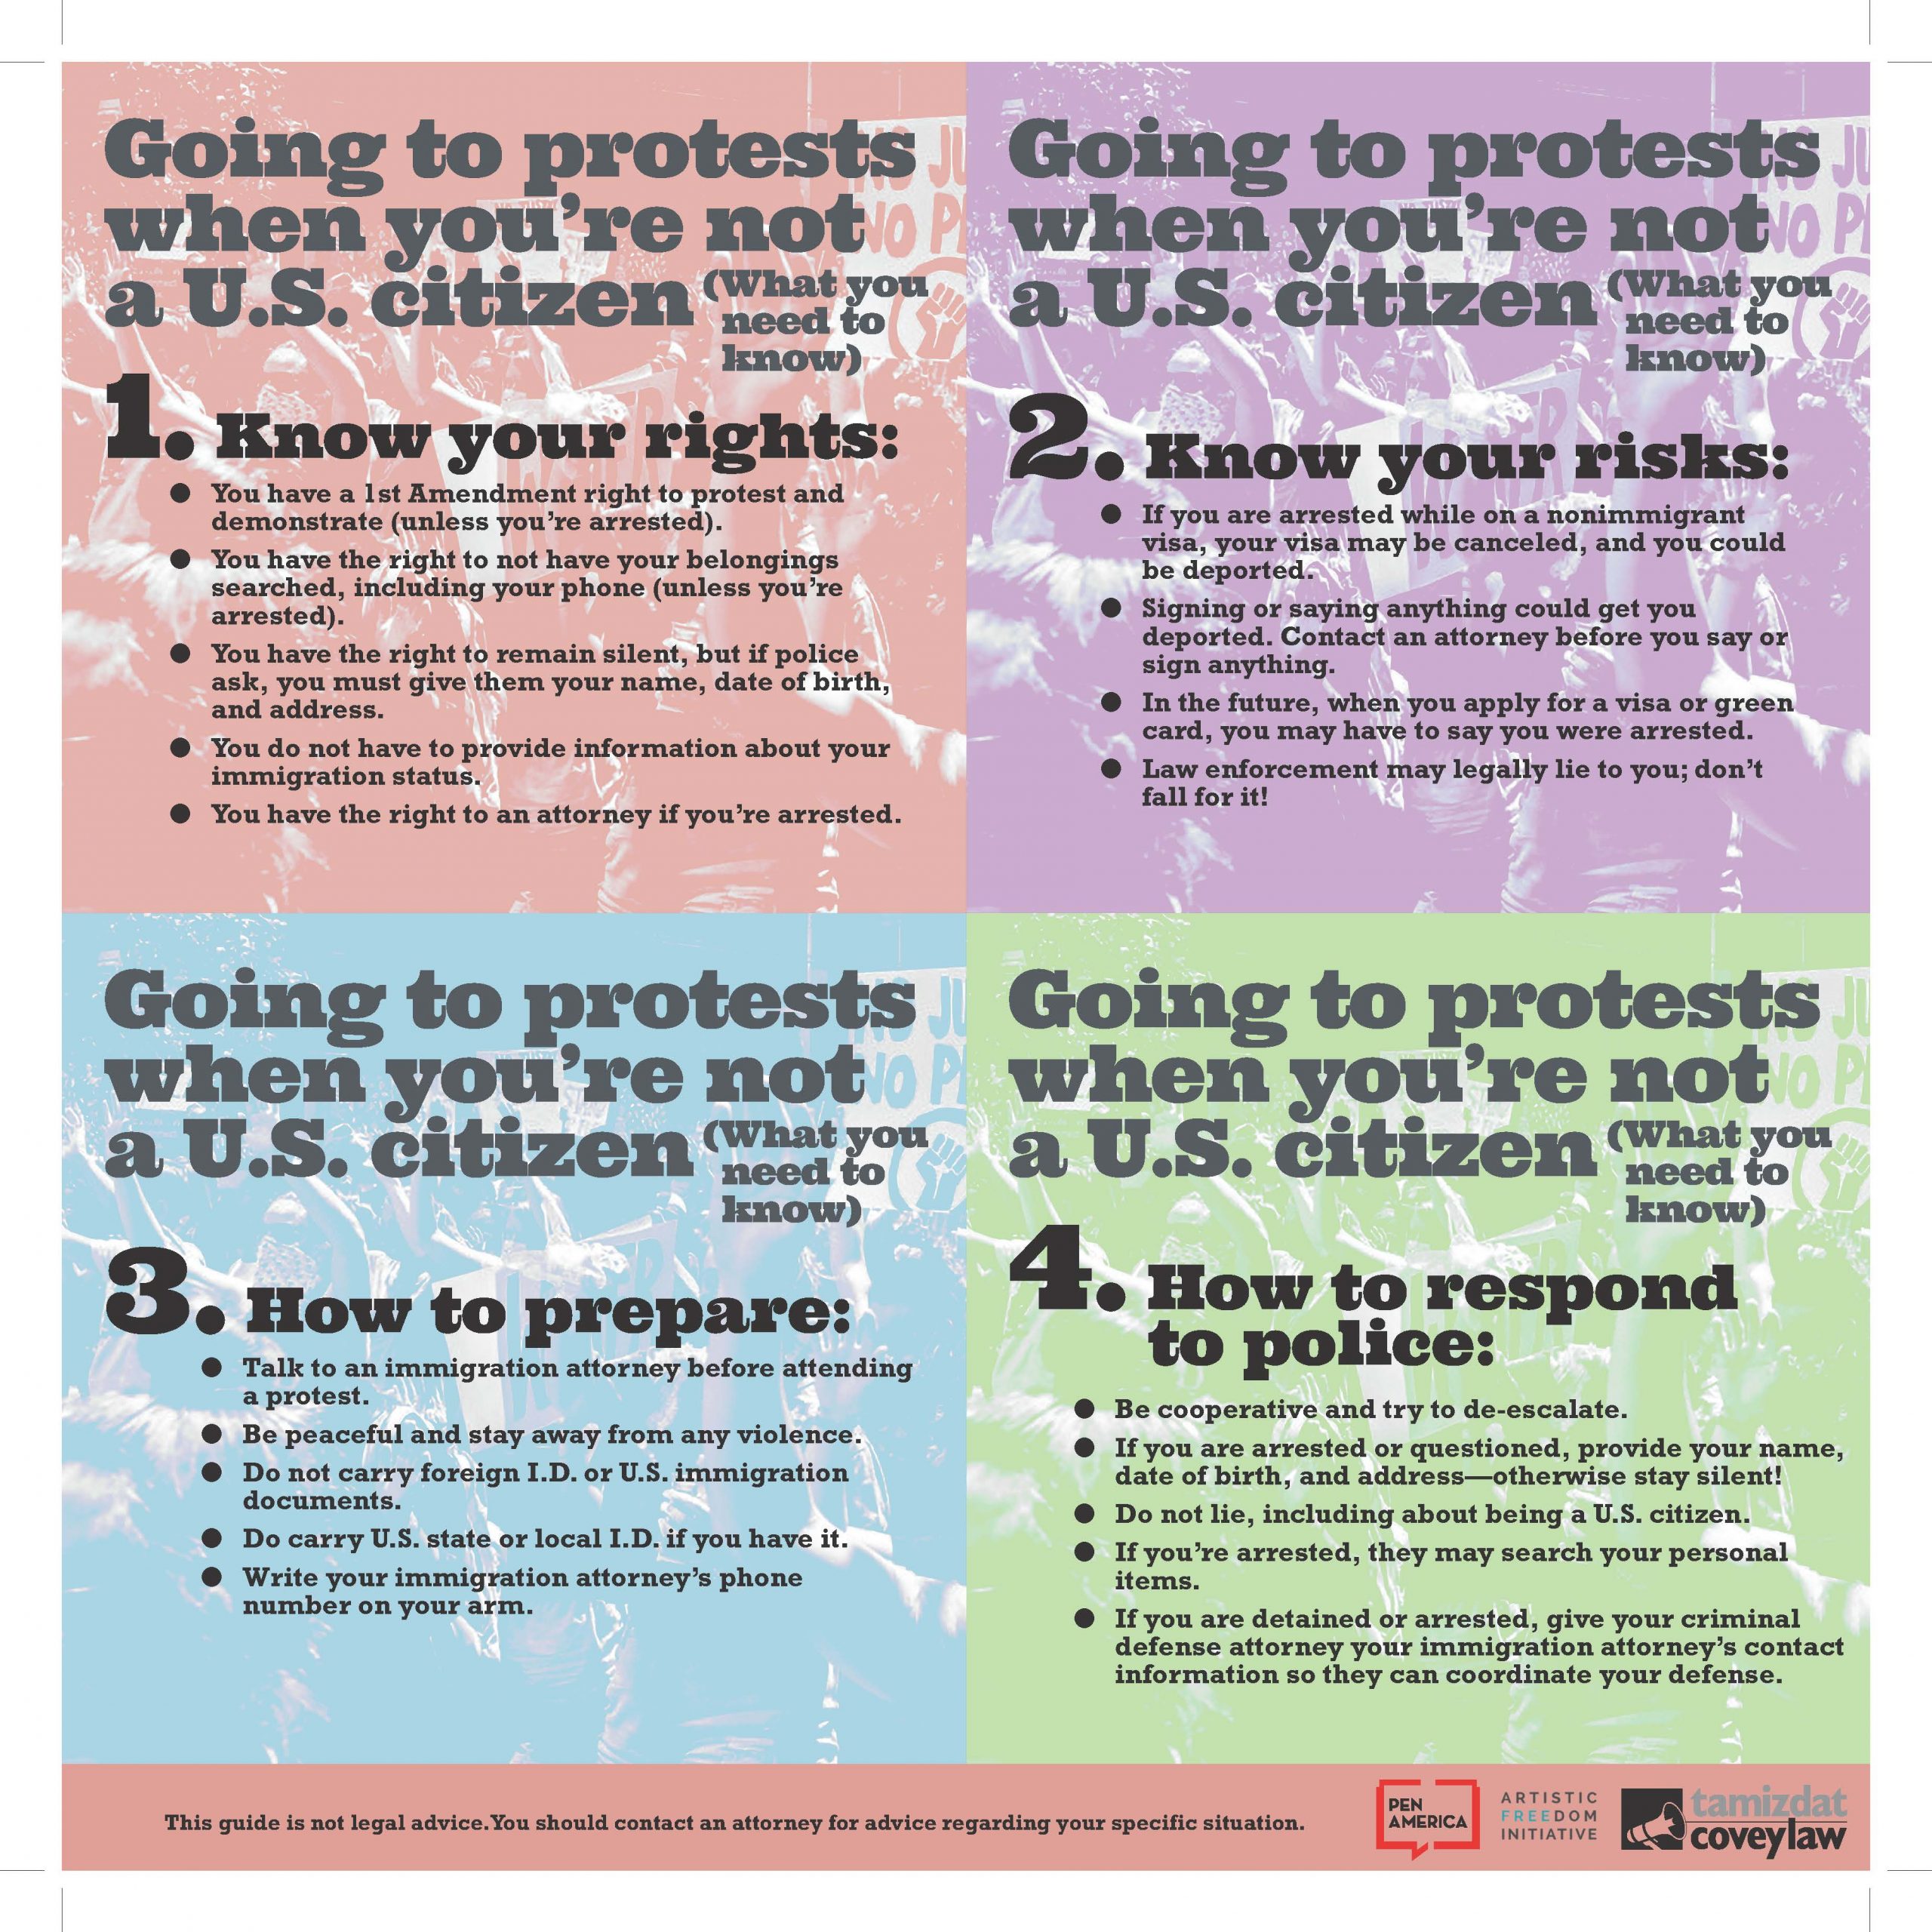 Tamizdat creates Know Your Rights Guide to Protesting for . Citizens  – Tamizdat